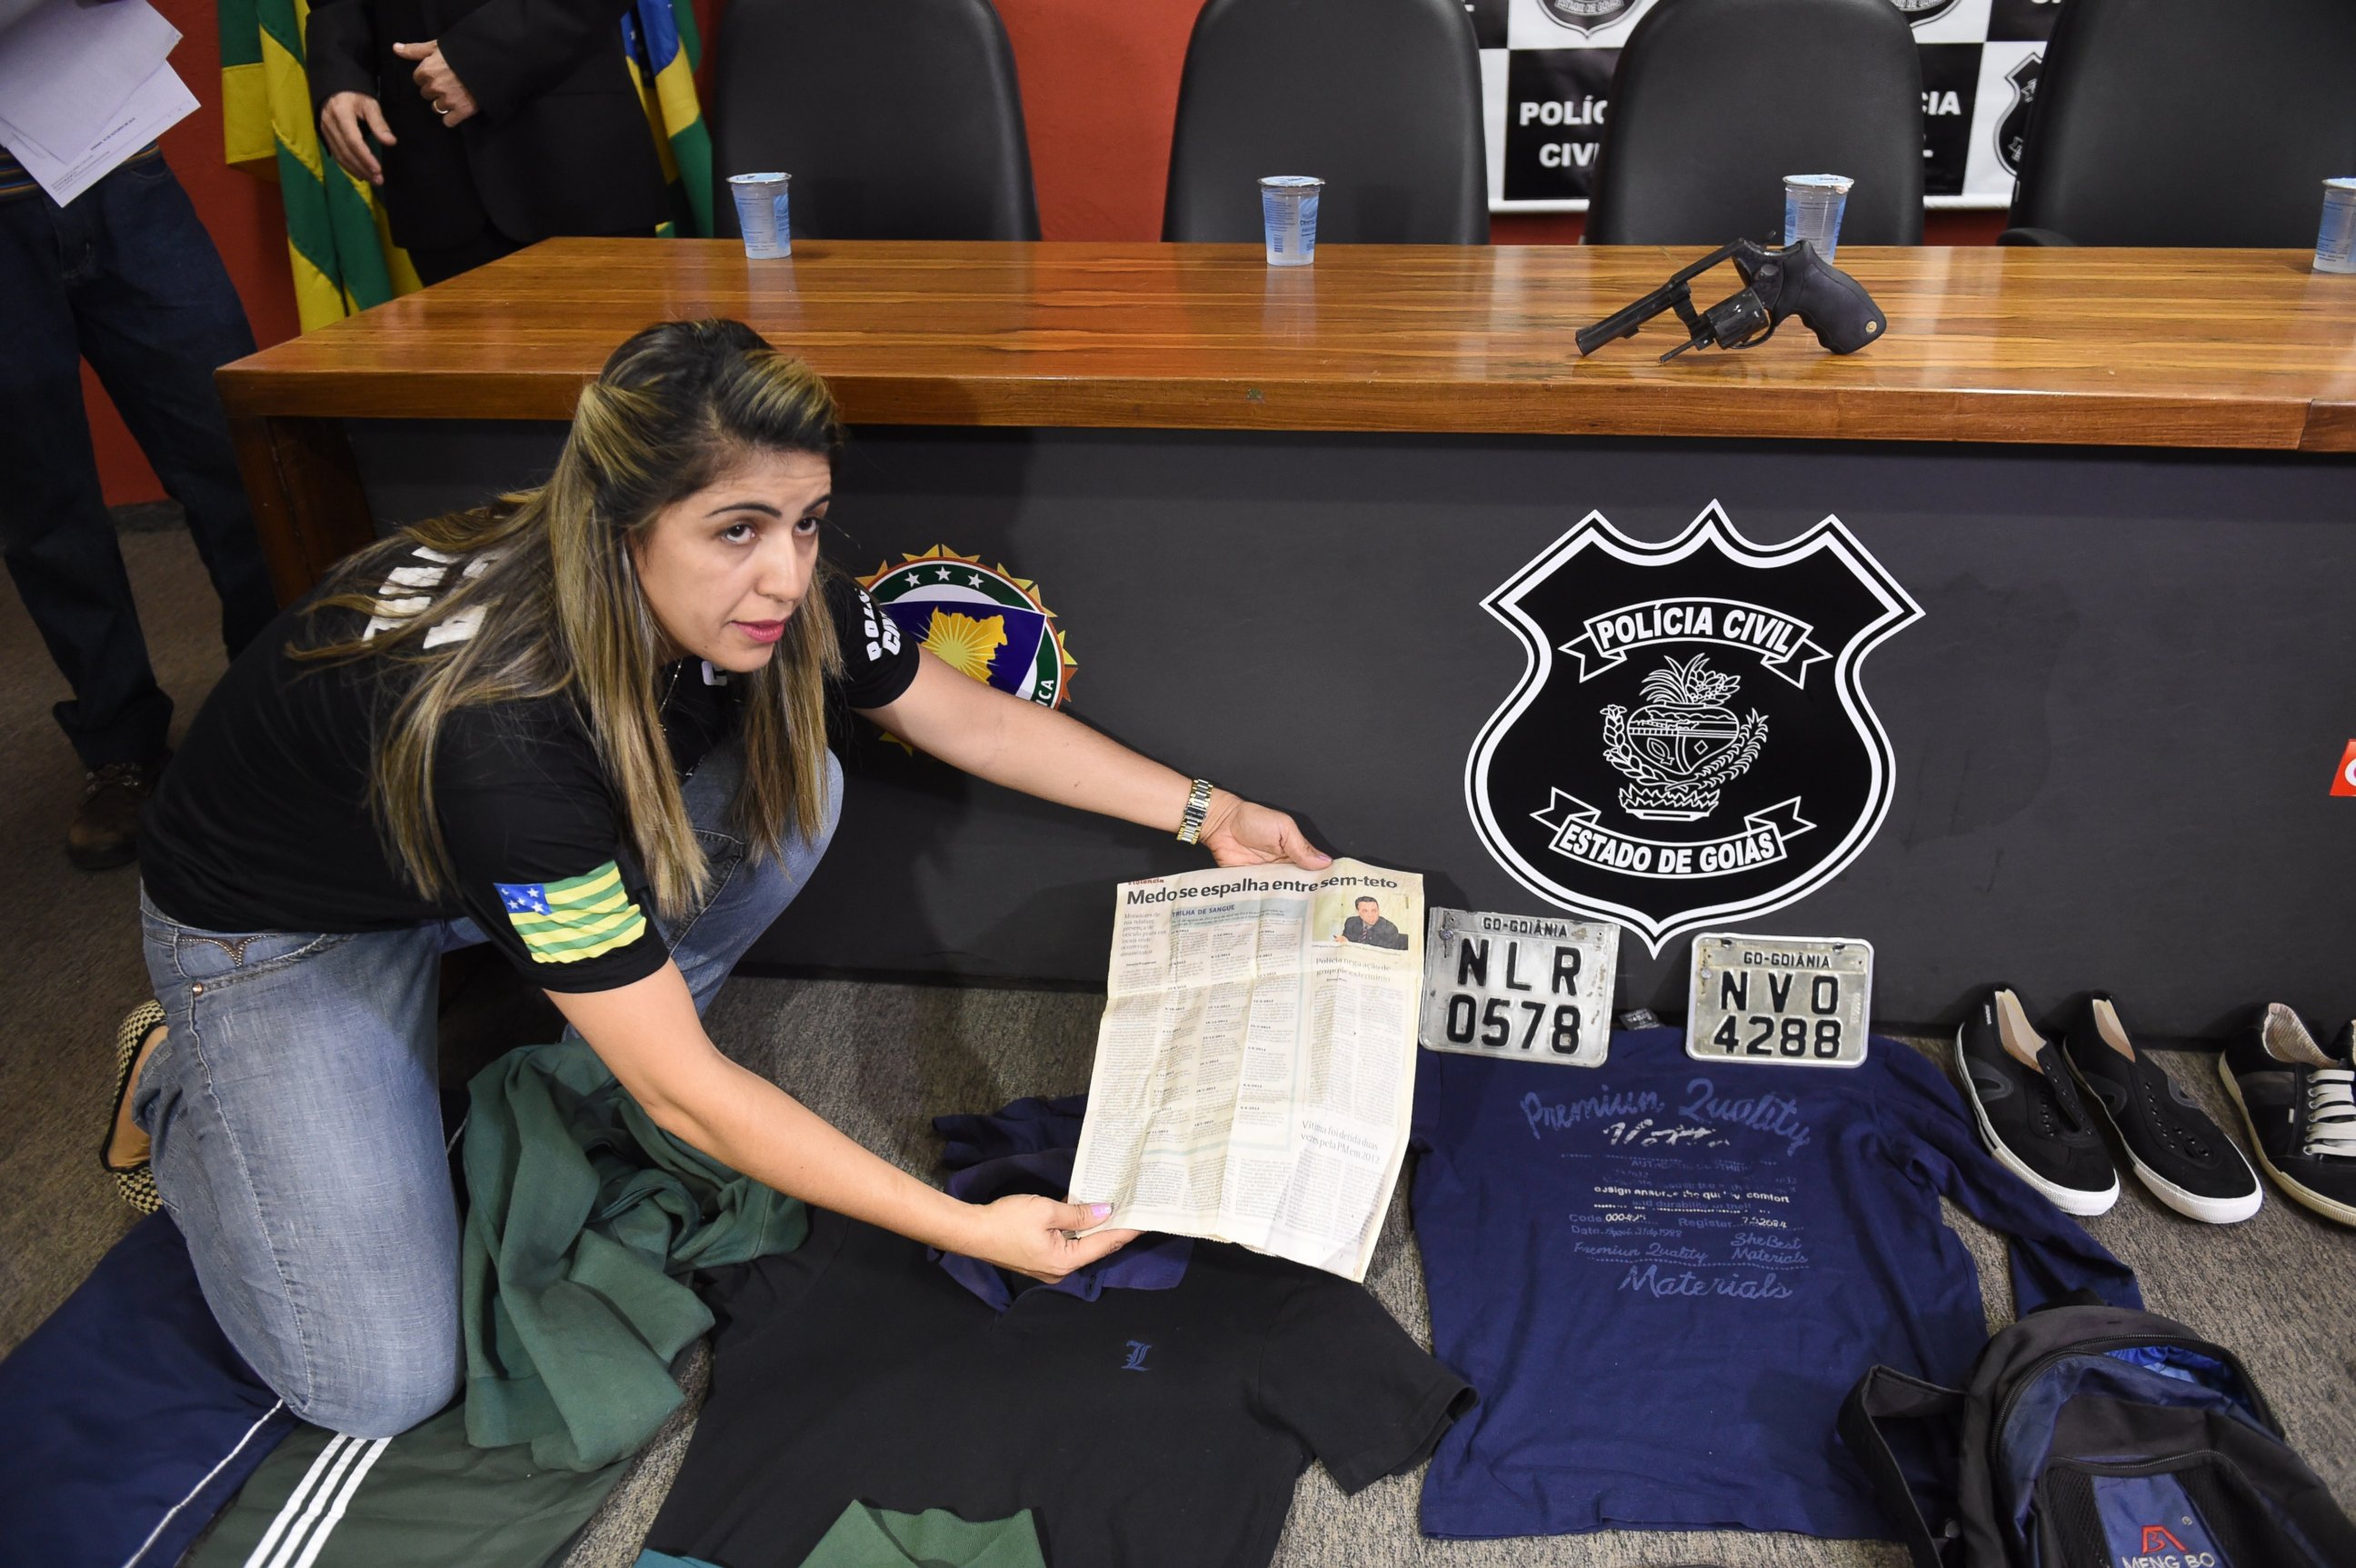 PHOTO: A police officer shows clothes, a gun, and other objects seized during the arrest of alleged serial killer Tiago Gomes da Rocha (not pictured), suspected of killing 39 people, at the Department of Security in Goiania, Brazil, Oct. 16, 2014. 